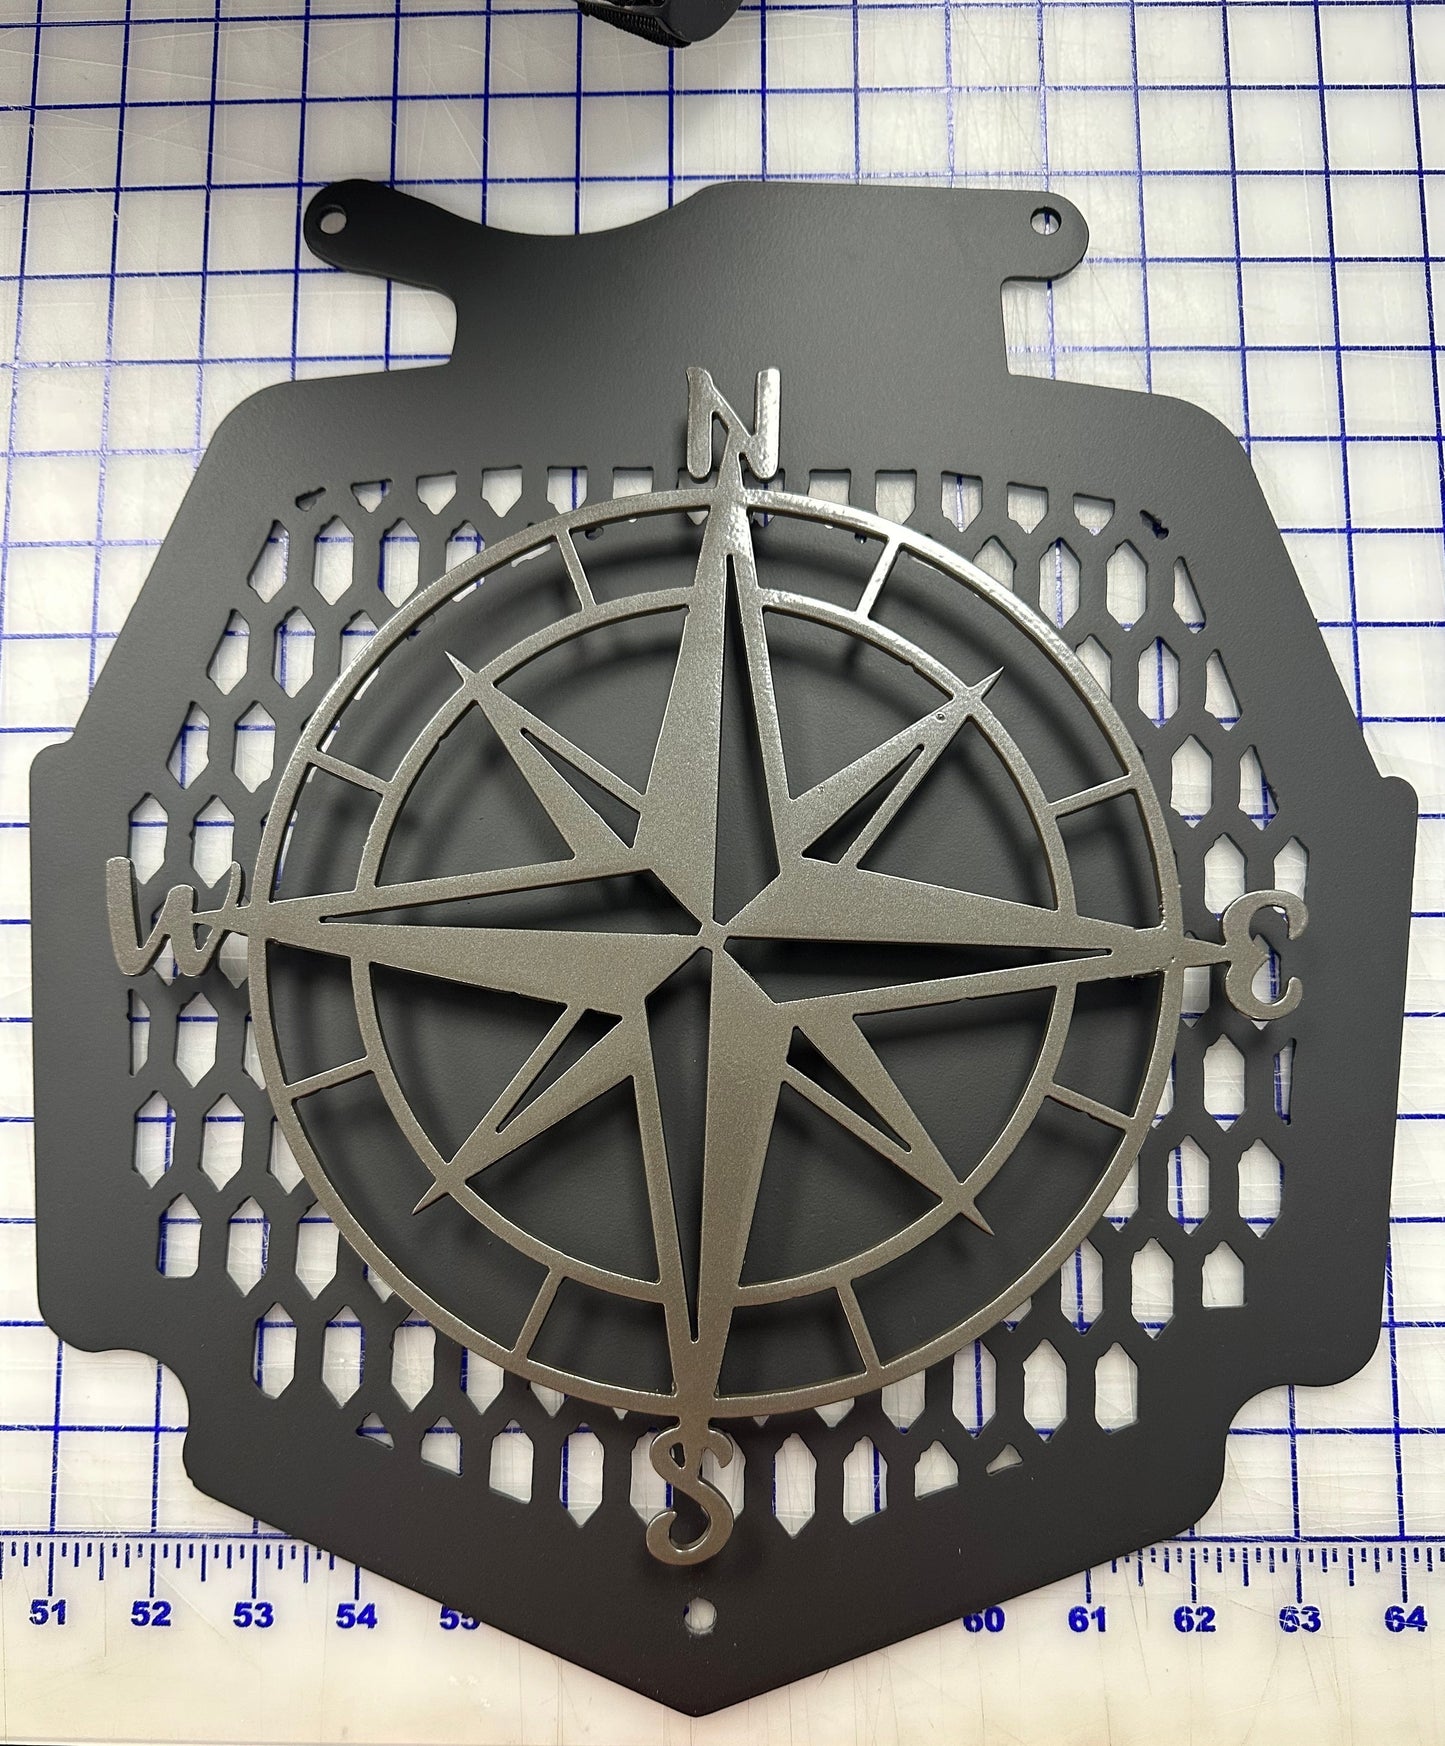 Nautical Star Compass 2 Layer-All Metal- Cover for Radiator on Can Am Outlander Max XMR 450 570 650 850 1000- Choose Your Colors